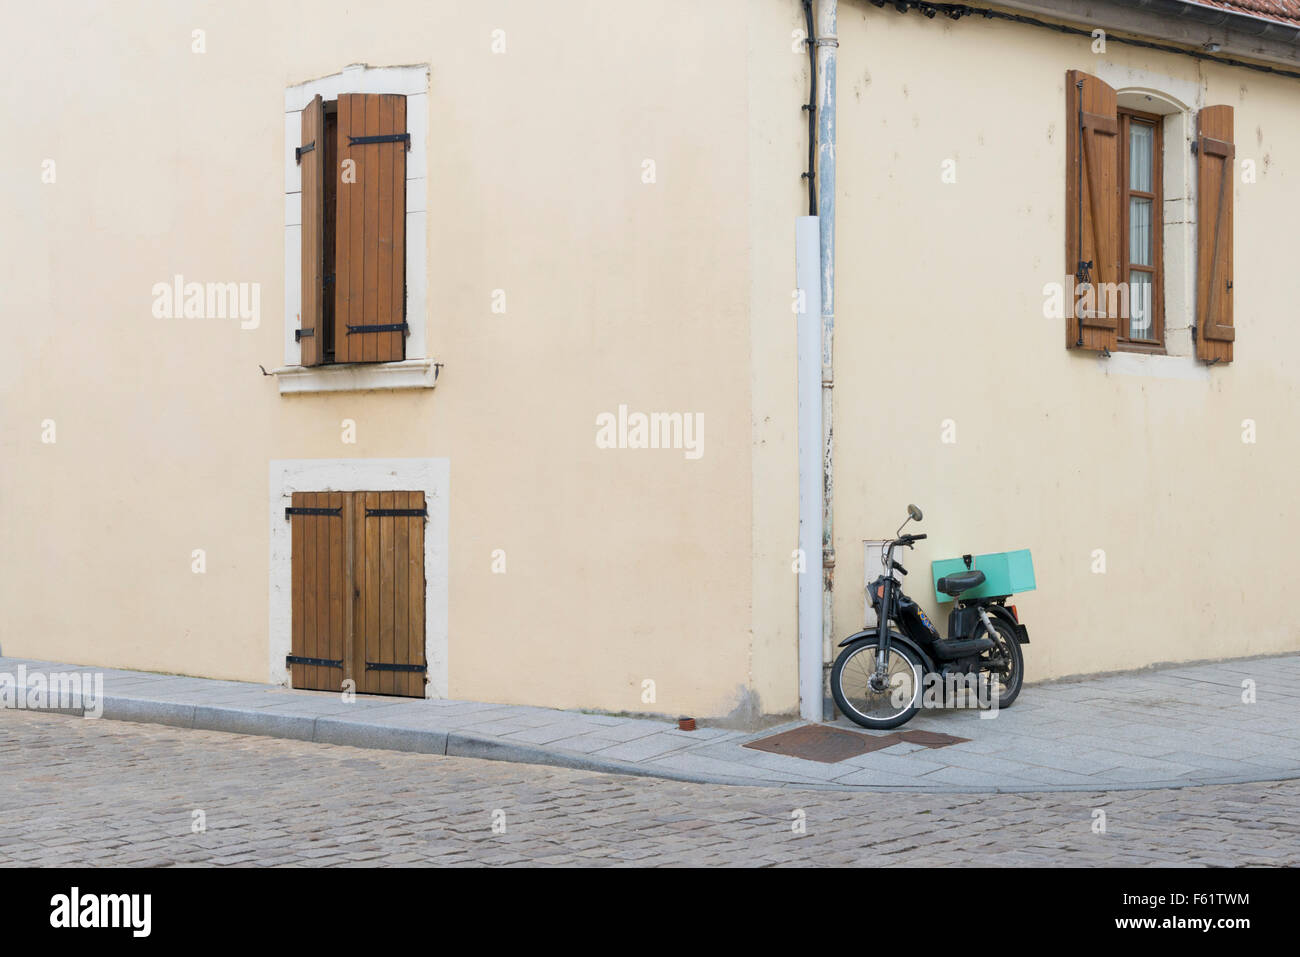 A French street scene in Chagny Burgundy France with a motorcycle parked against a building wall Stock Photo